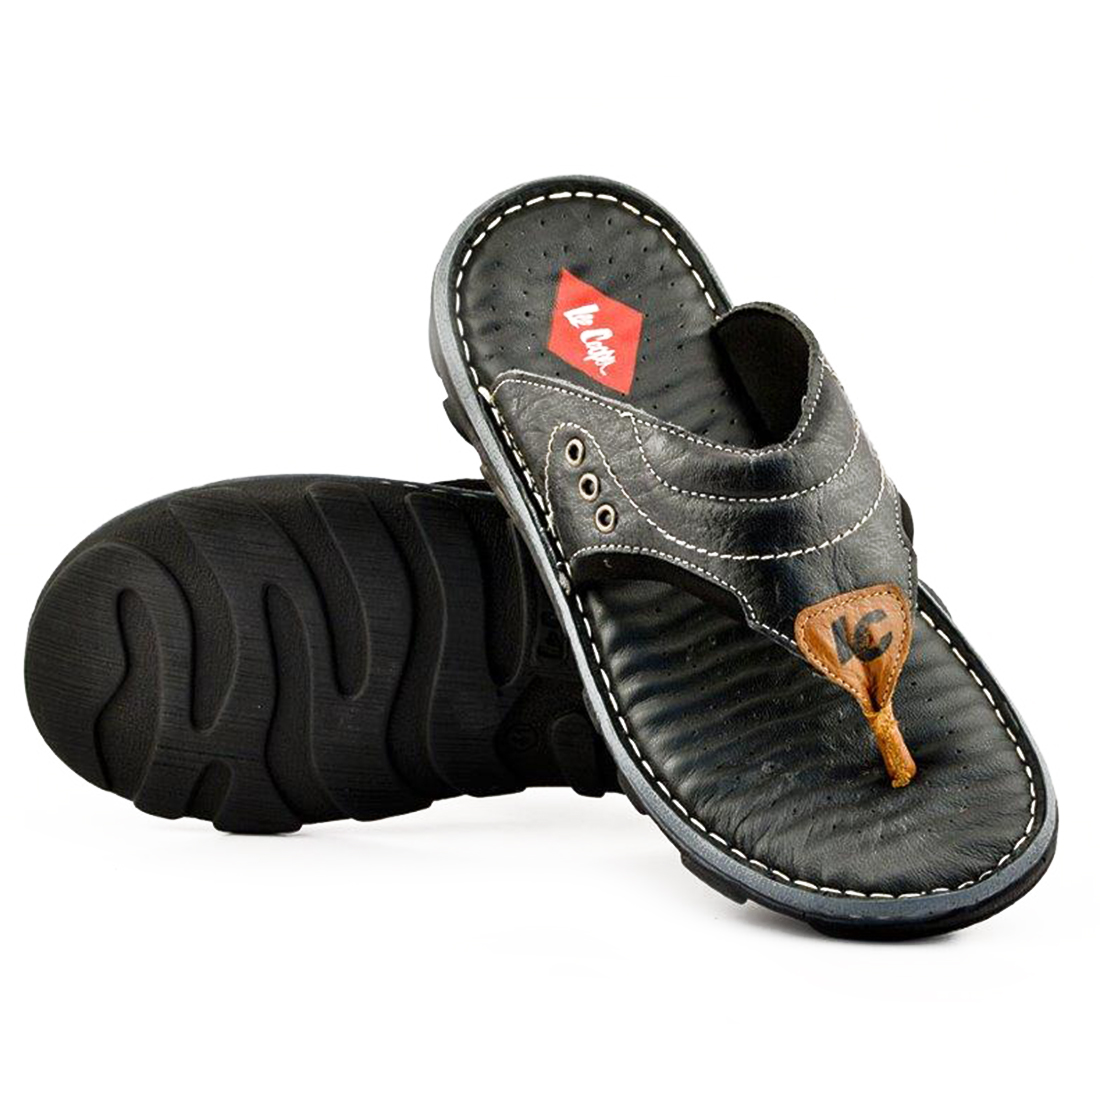 Buy Lee Cooper Black Thong Slippers Online @ ₹1699 from ShopClues